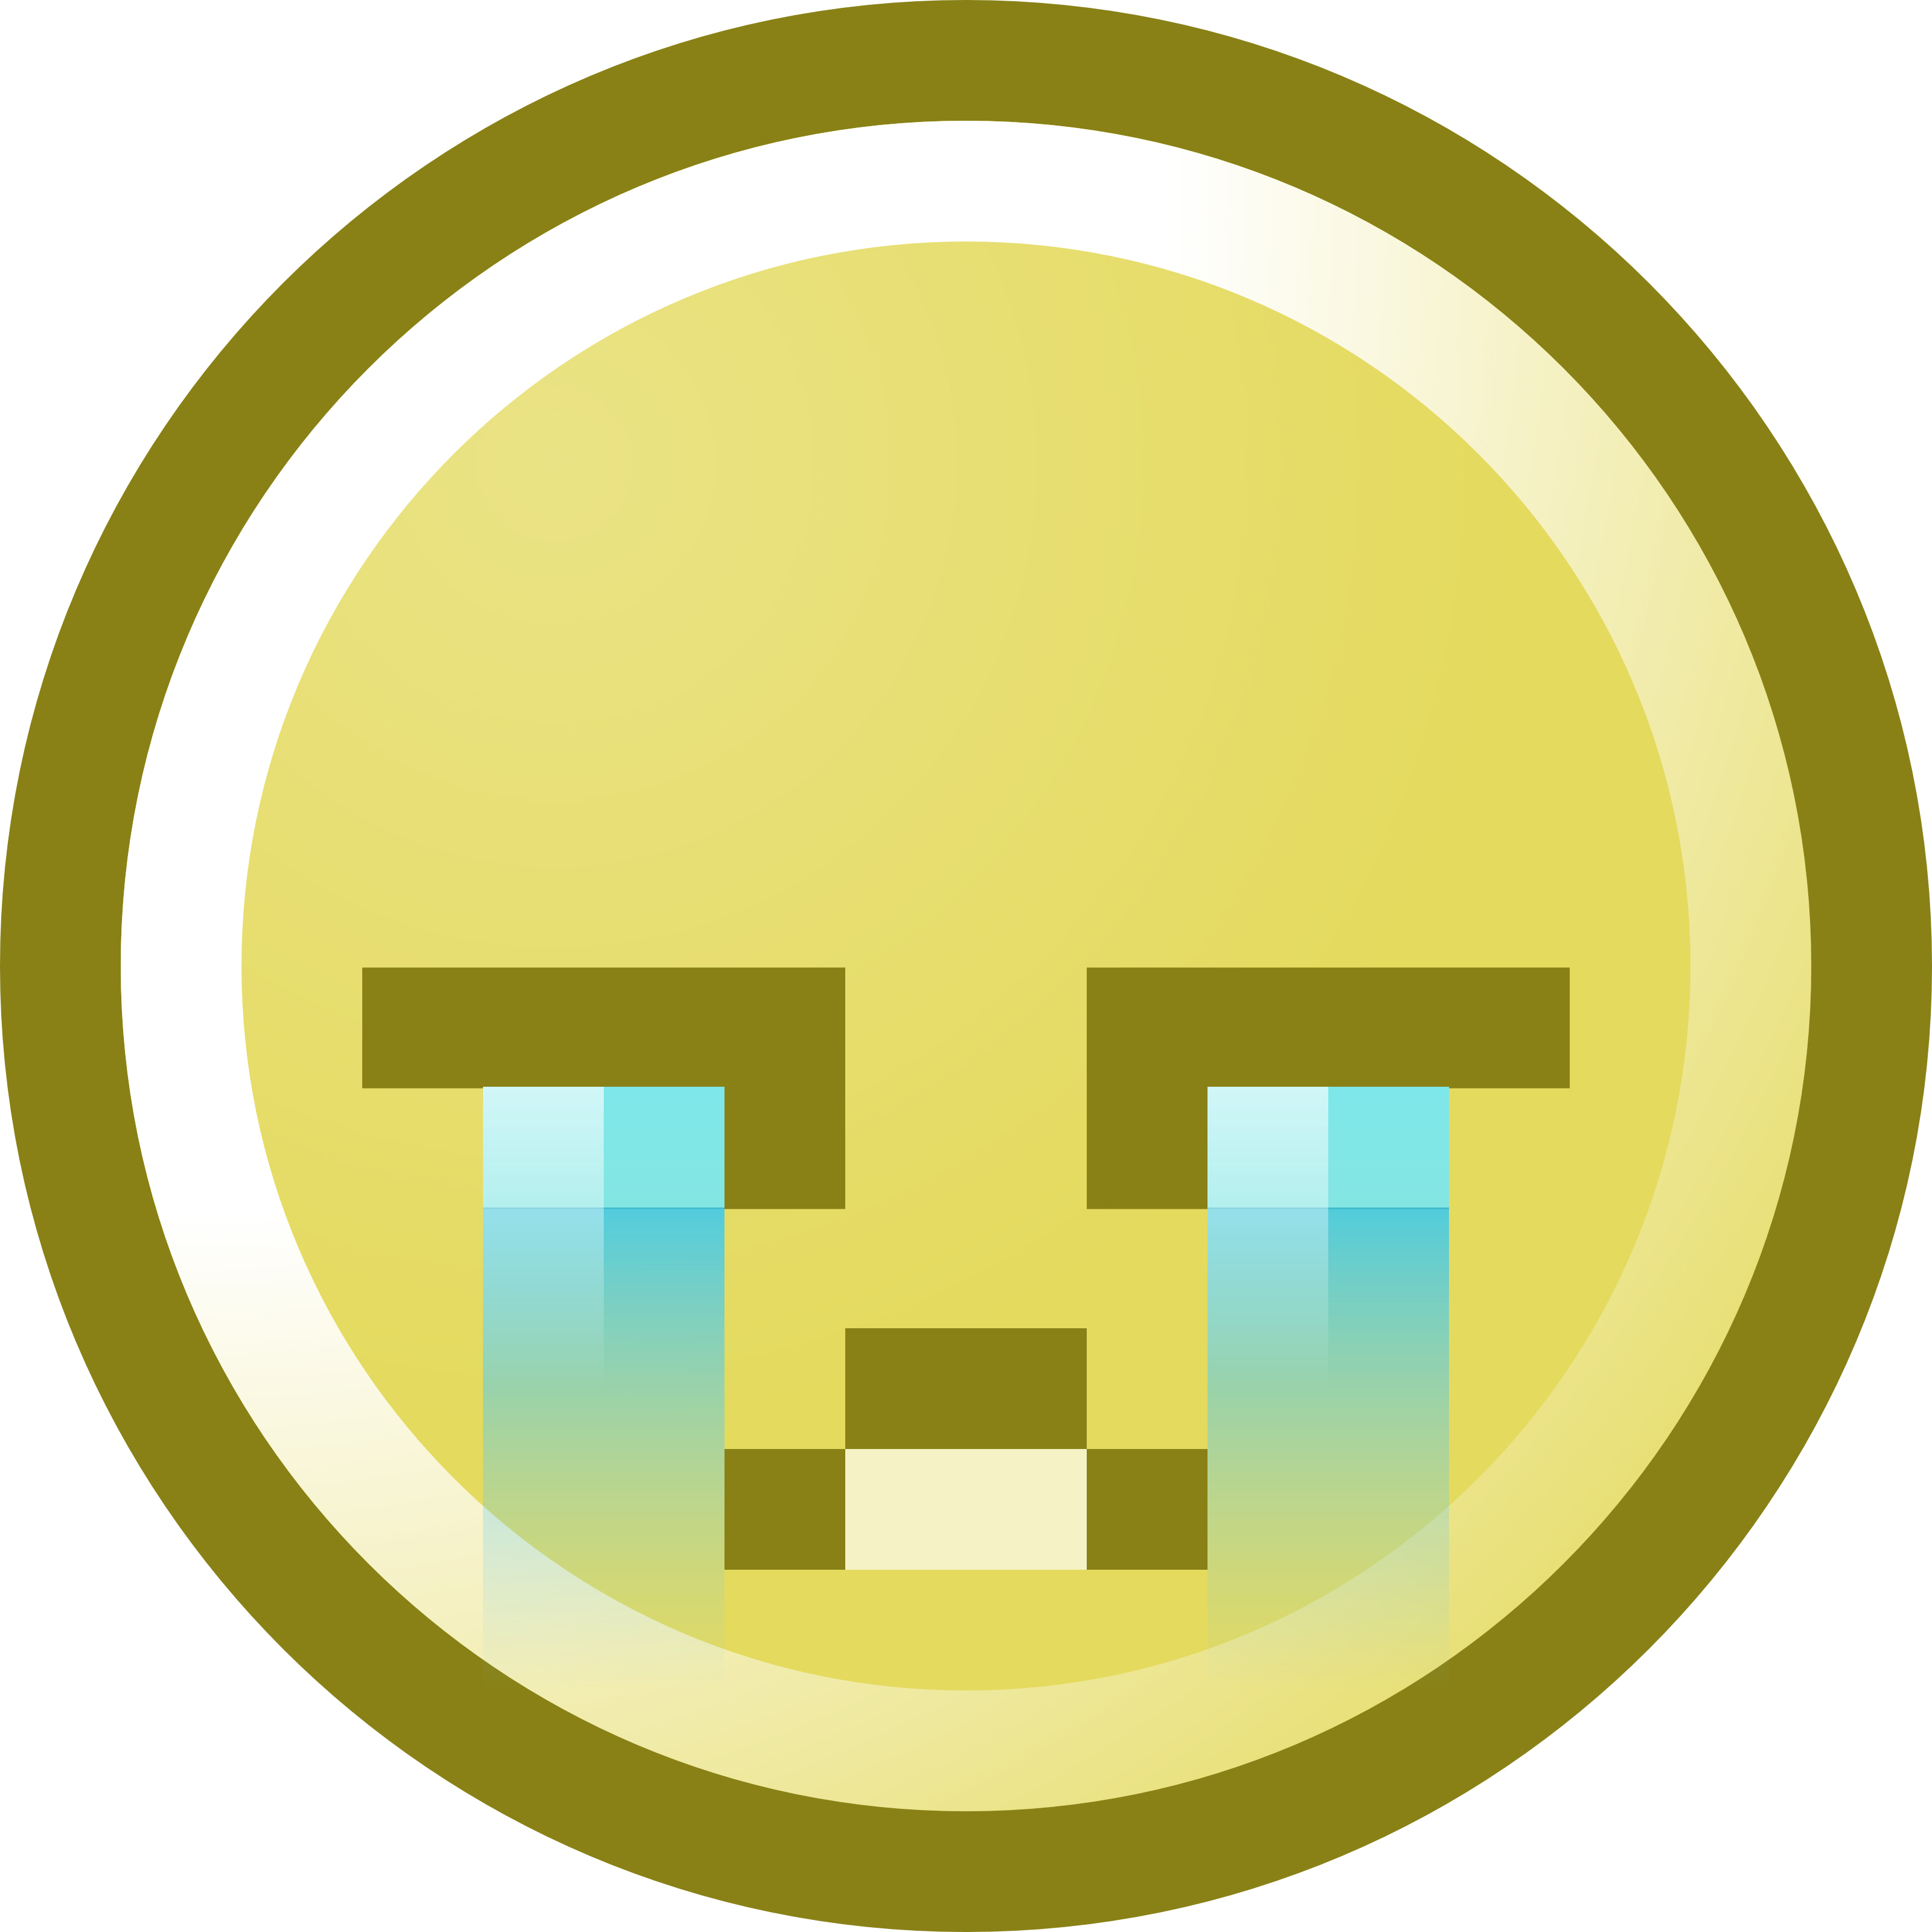 Sad Smiley Face Crying - Clipart library